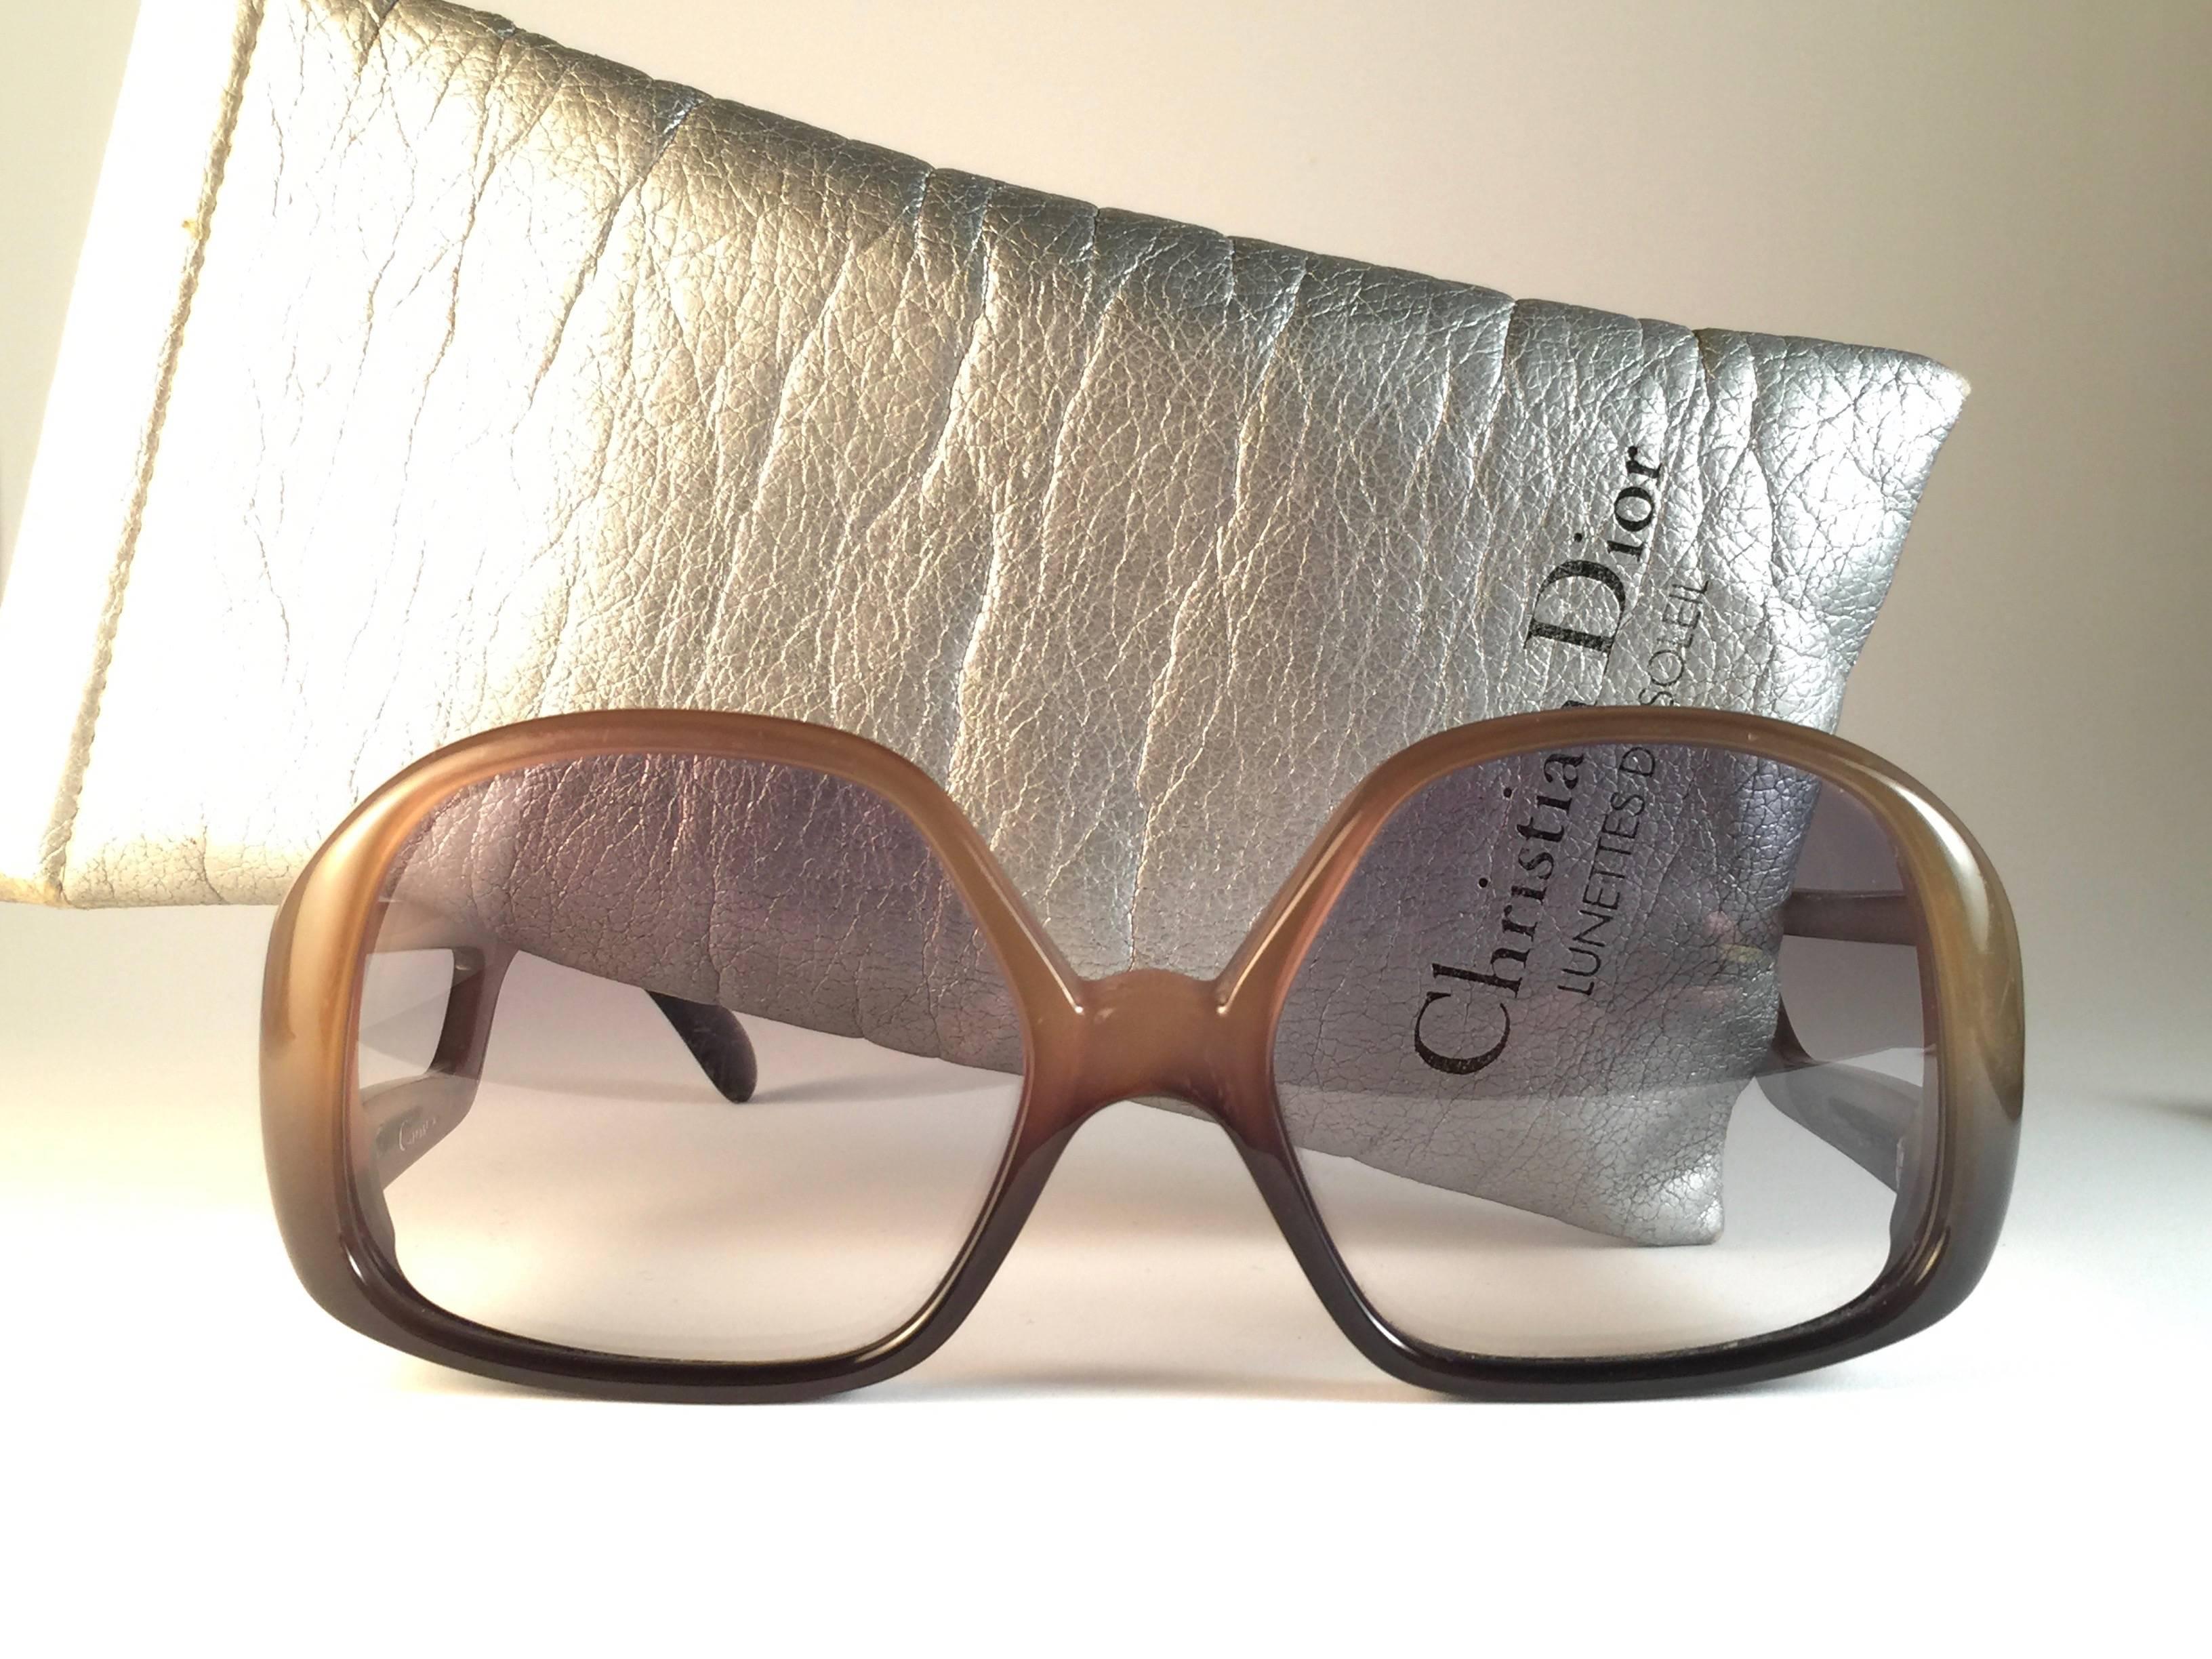 New vintage Christian Dior sunglasses. Cutout side details.

Light purple gradient lenses.

Comes with it original CD sleeve.

New, never worn or displayed this item may show light sign of wear due to storage.

Made in Austria